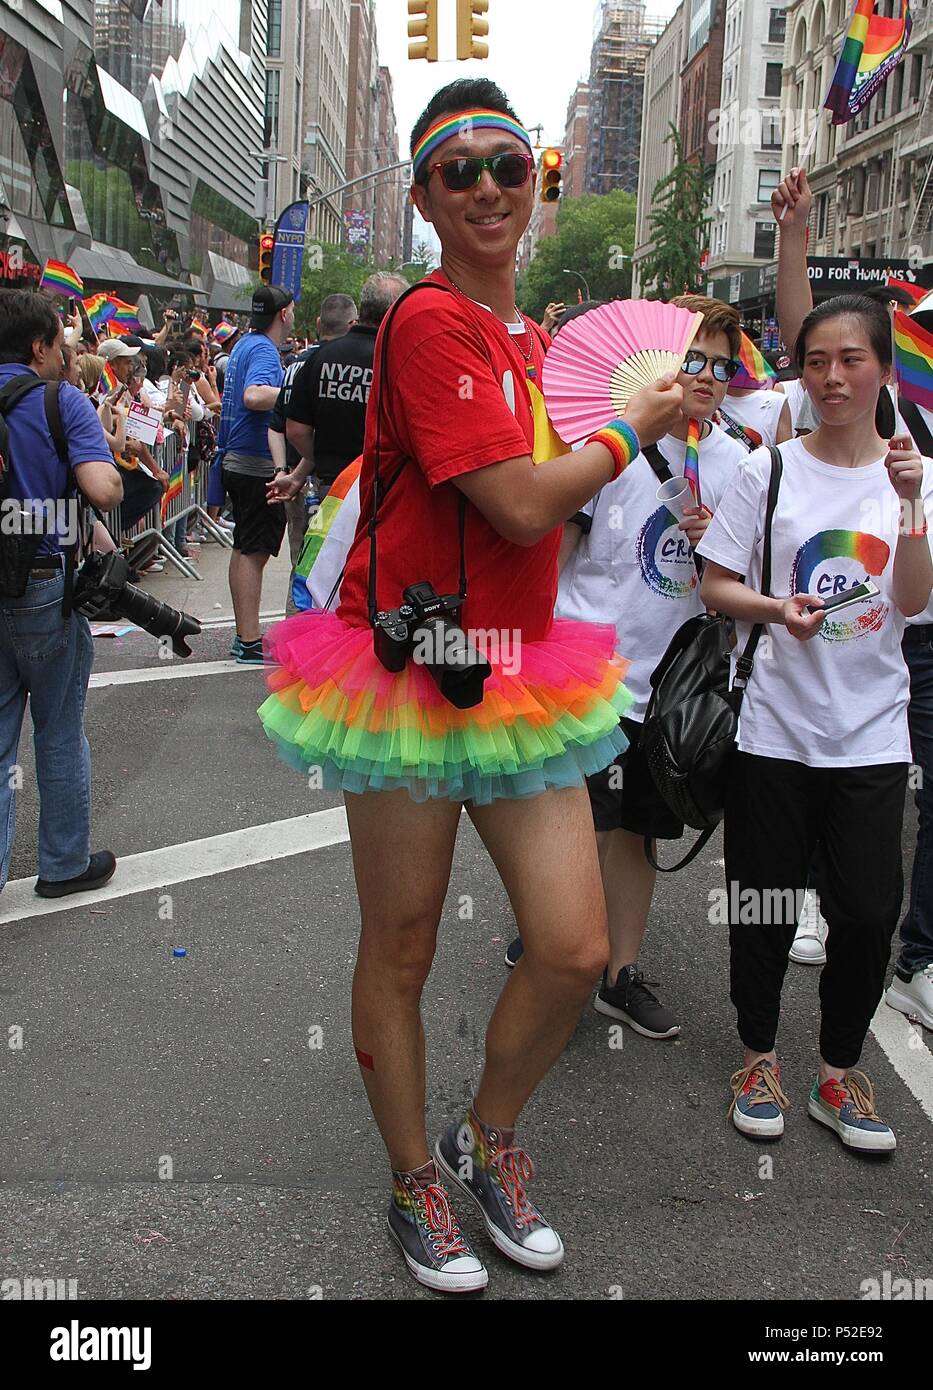 New York, NY, USA. 24th June, 2018. Participants in the 2018 NYC Pride Parade in New York, New York on June 24, 2018. Credit: Rainmaker Photo/Media Punch/Alamy Live News Stock Photo